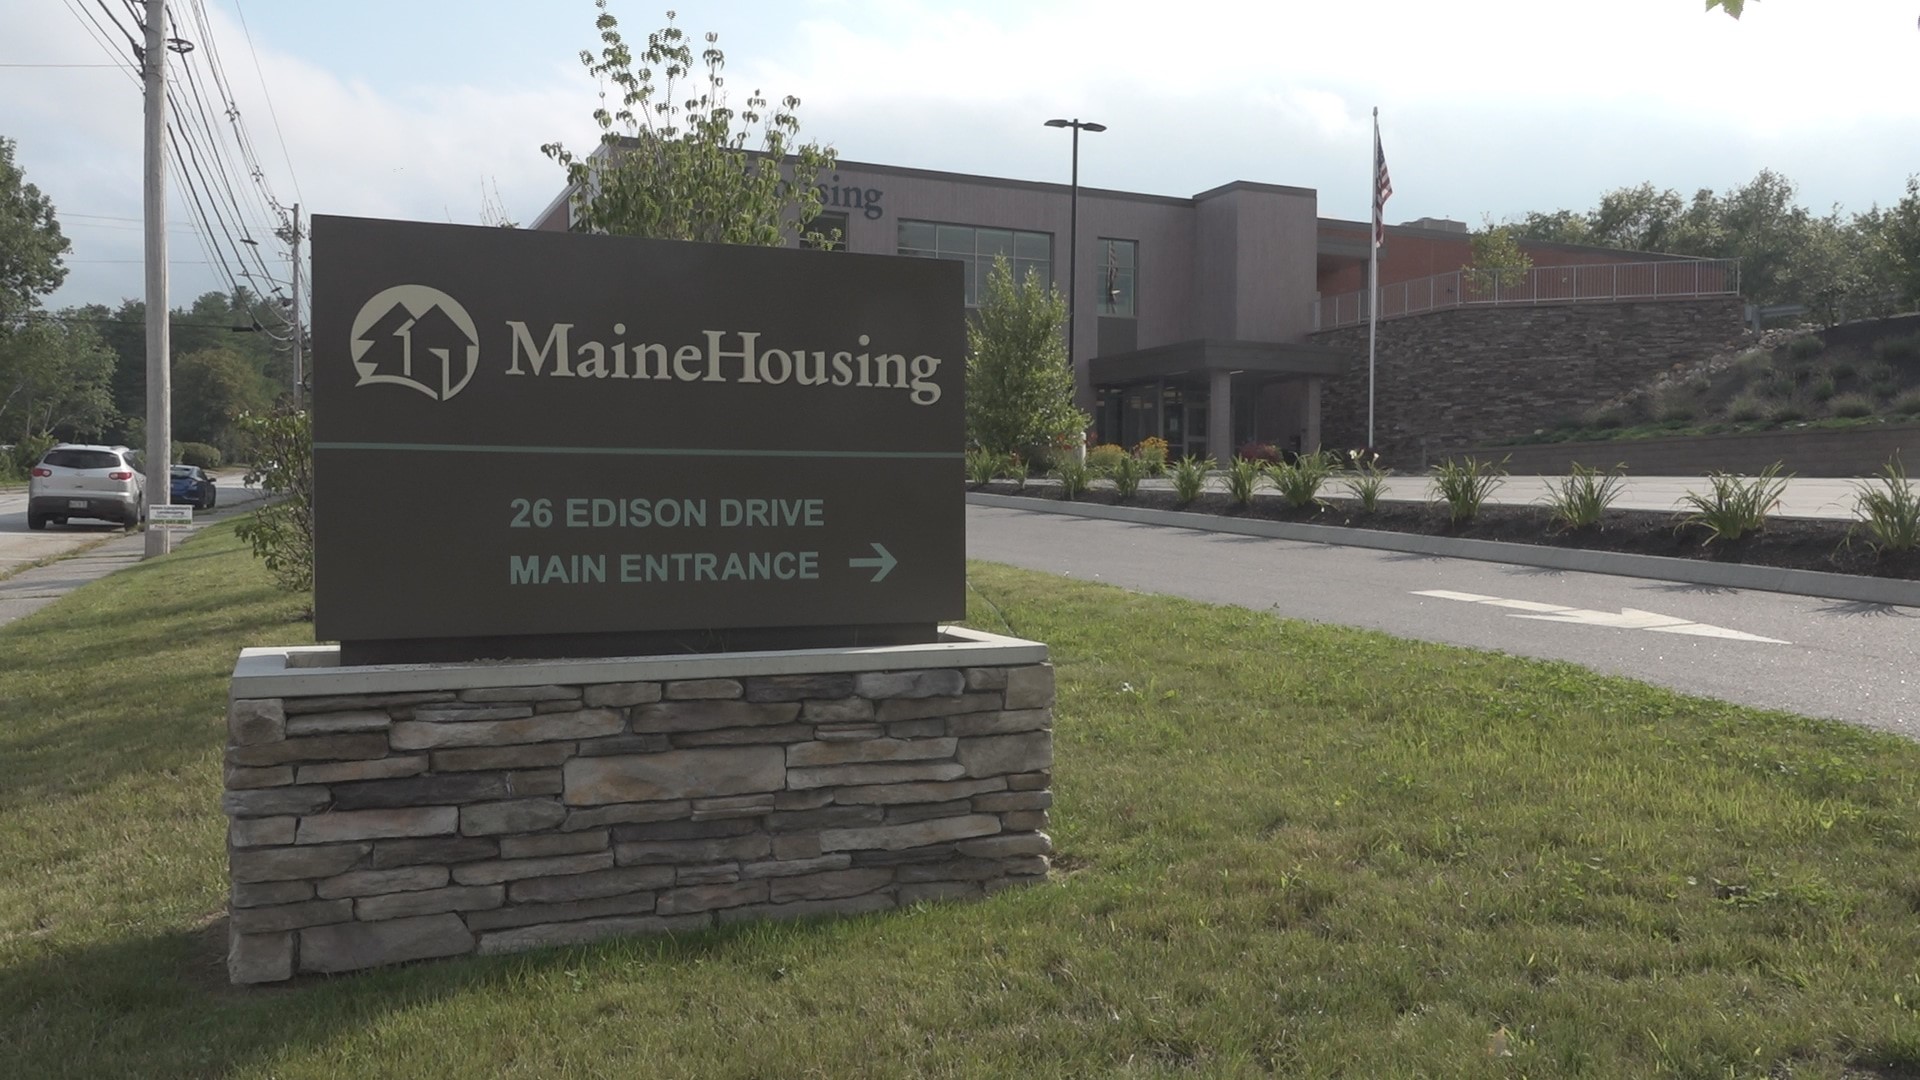 The organization said the initiatives will help support housing and shelter for over 500 Mainers experiencing housing insecurity or homelessness.